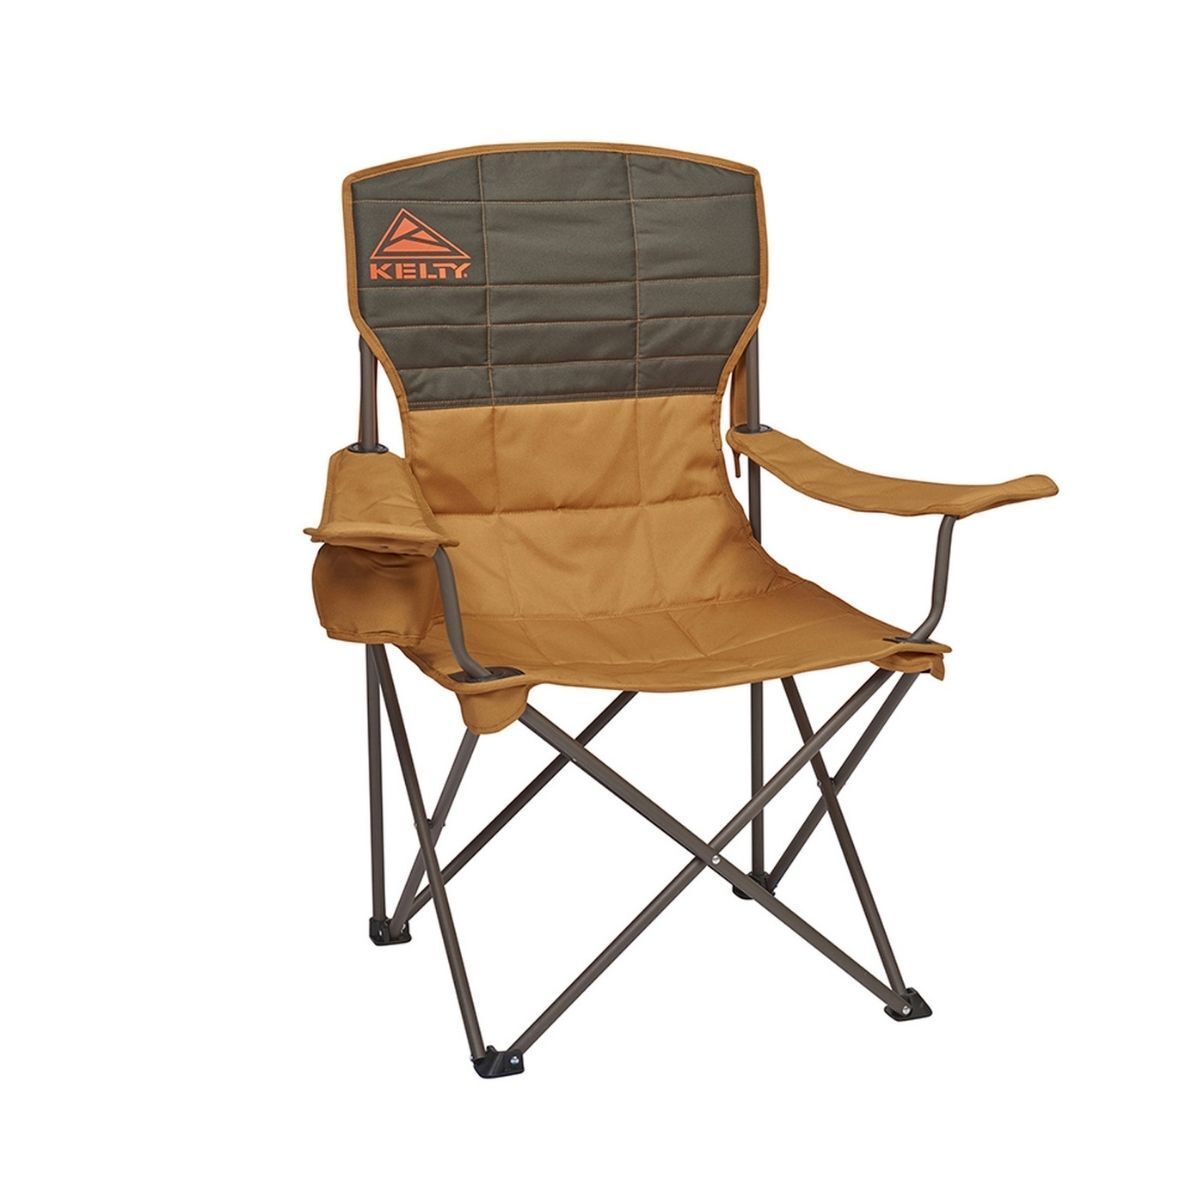 Kelty Essential Chair - Silla de camping